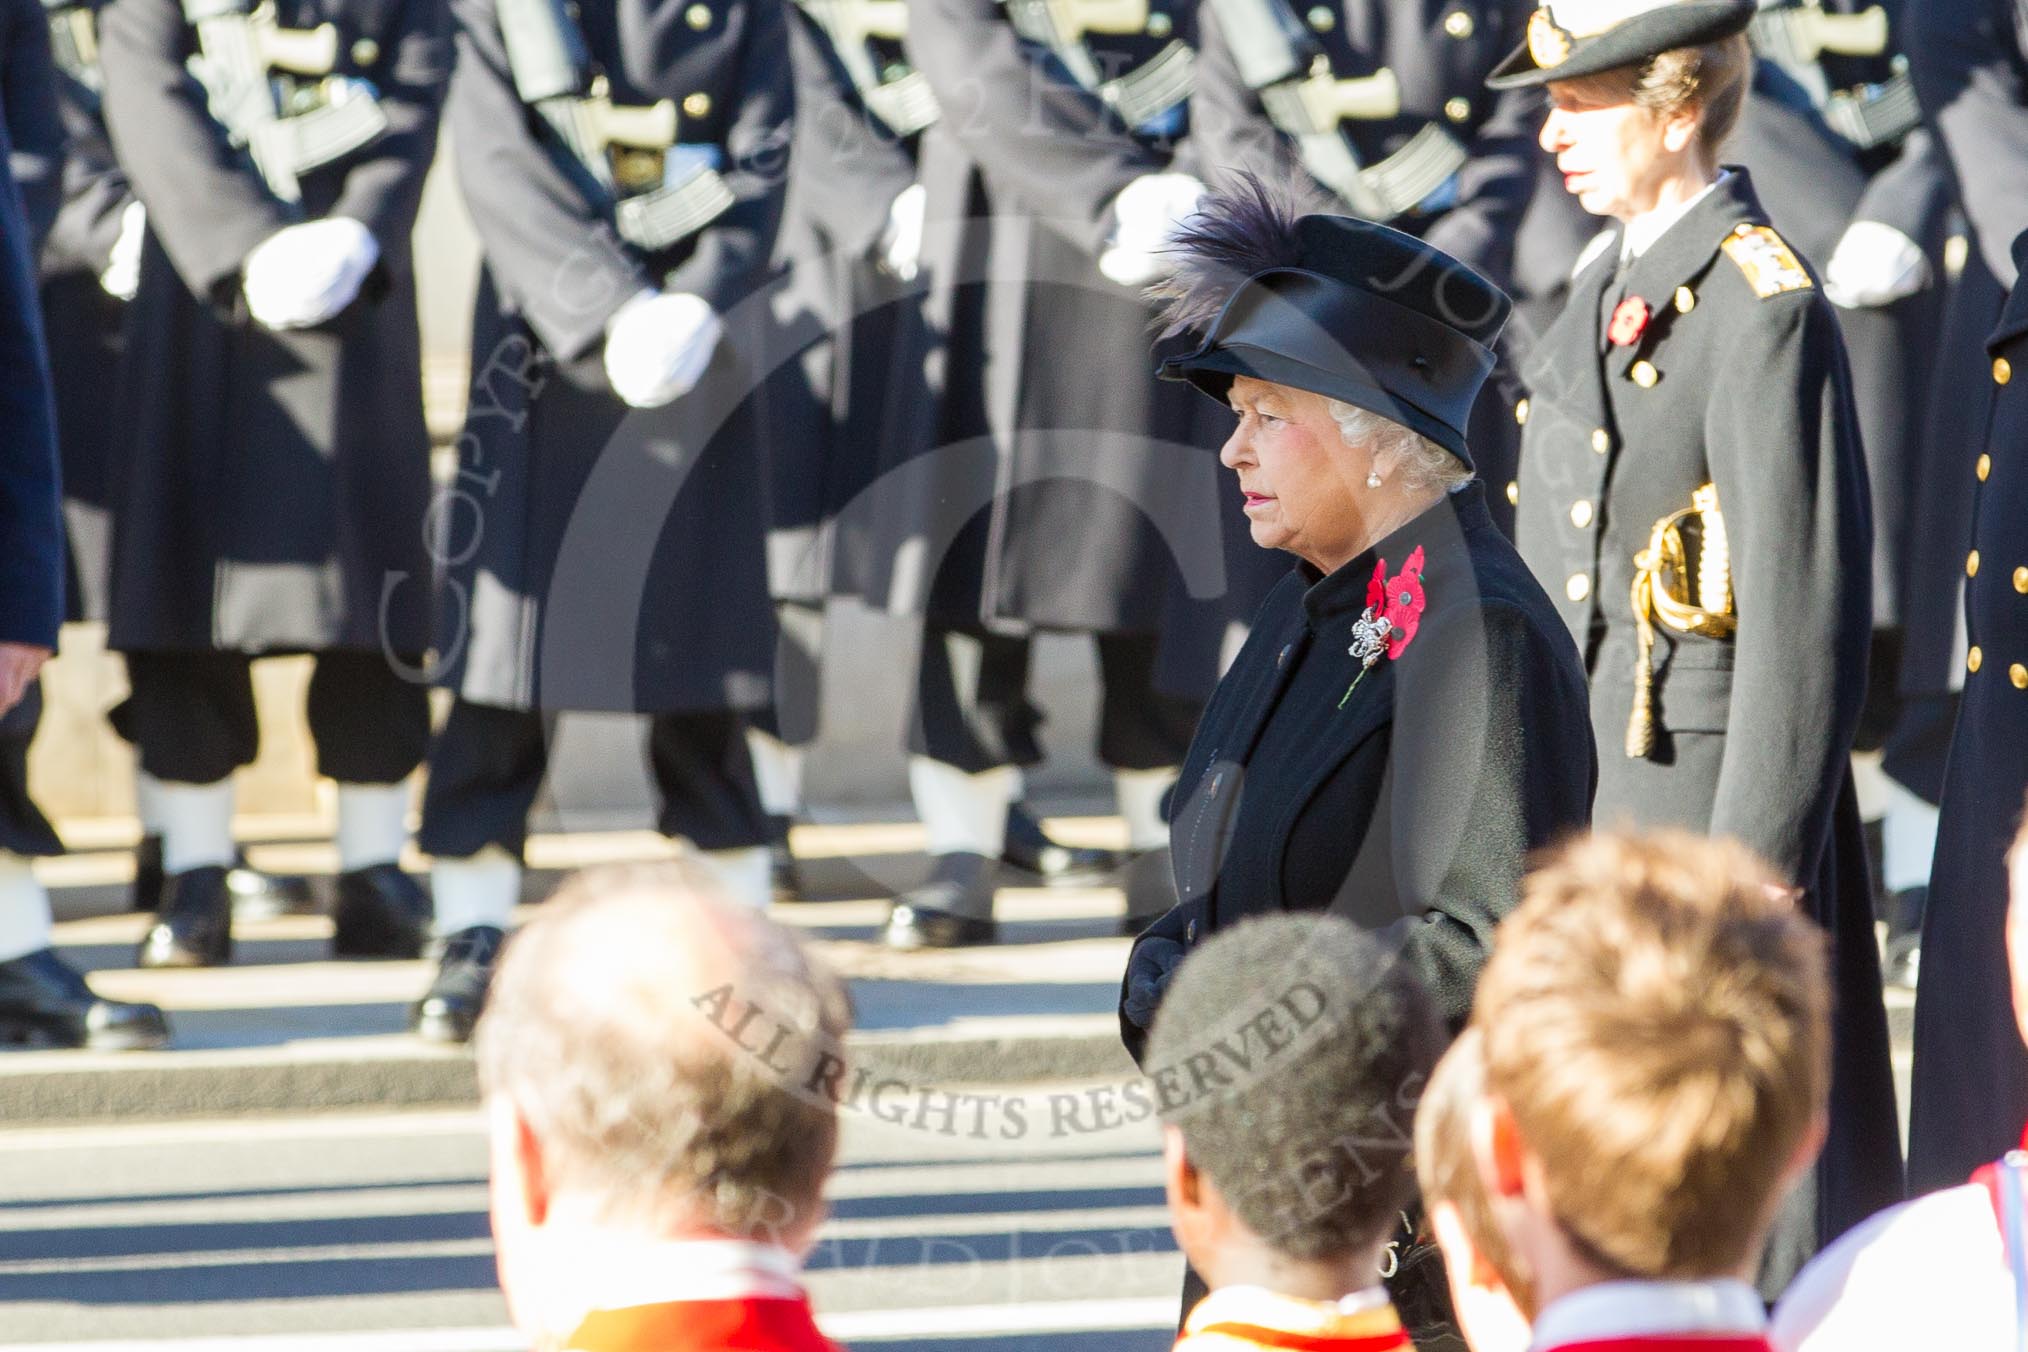 HM The Queen during the service by the Bishop of London.